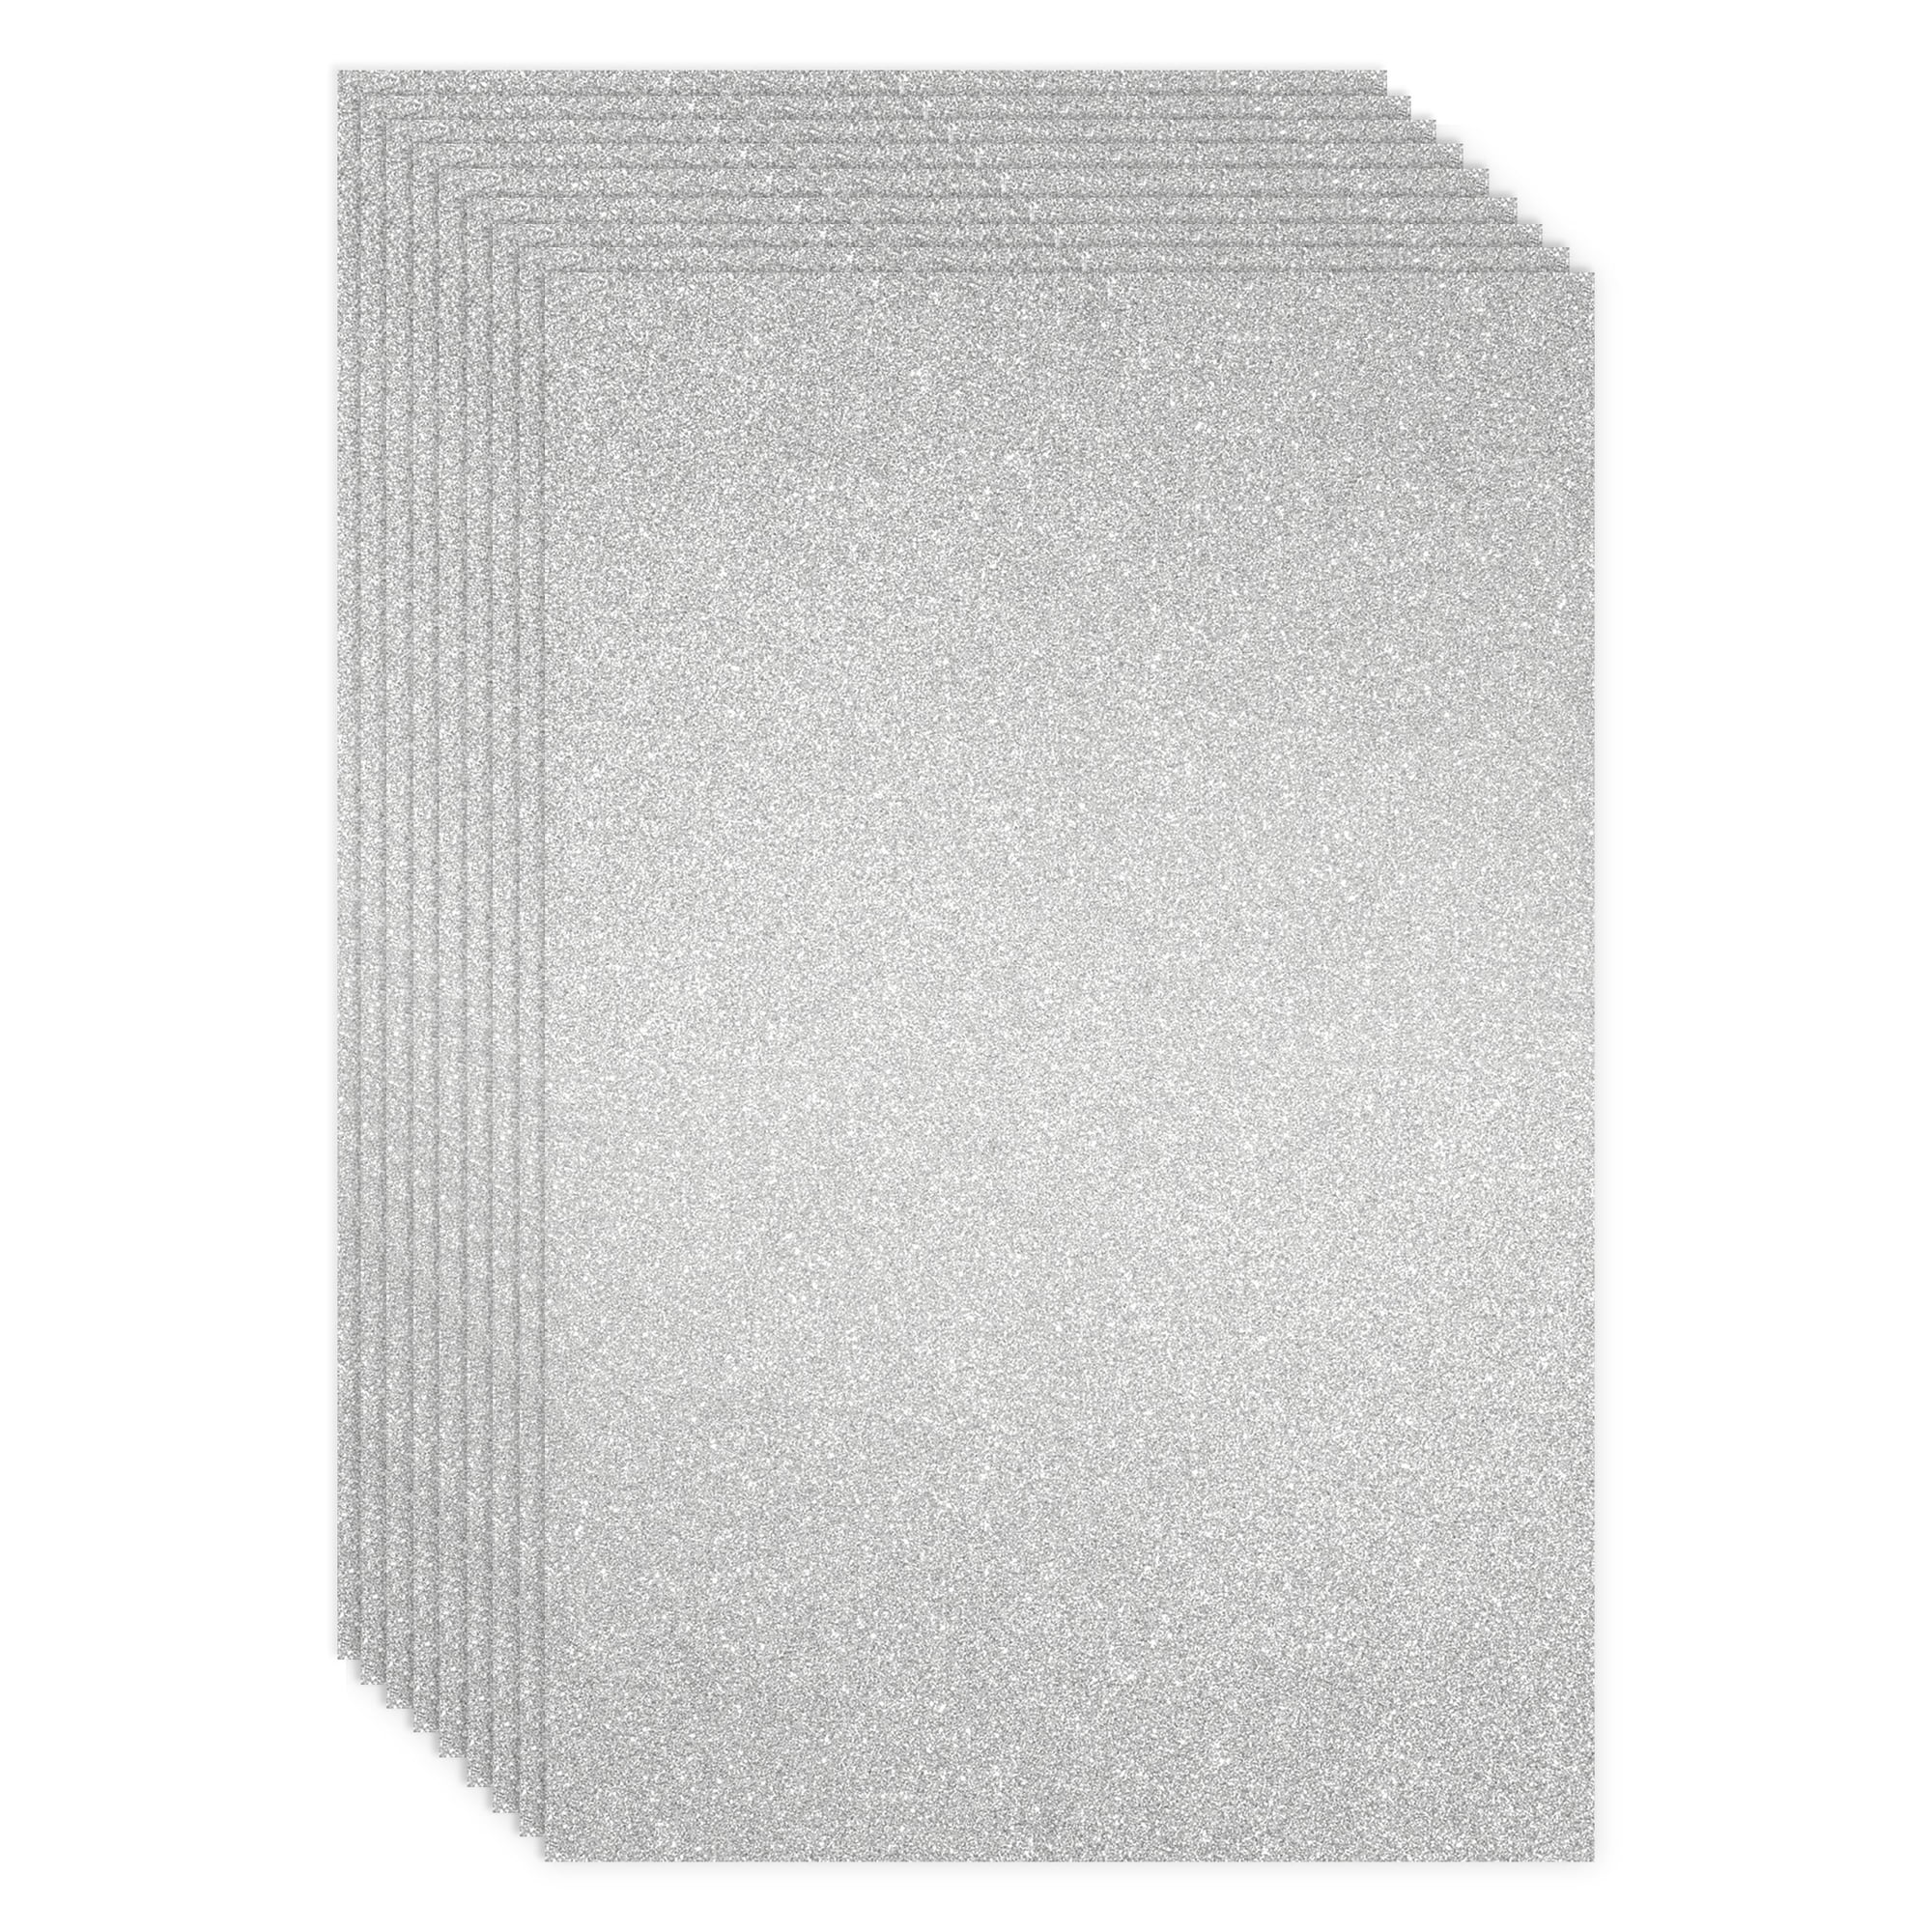  Sliver Glitter Cardstock Paper, 15 Sheets 12 x 12  300gsm/110Ib Square Colored Card Paper for Crafts DIY Projects Card Making  Birthday Wedding Decoration UAP21SR15 : Arts, Crafts & Sewing